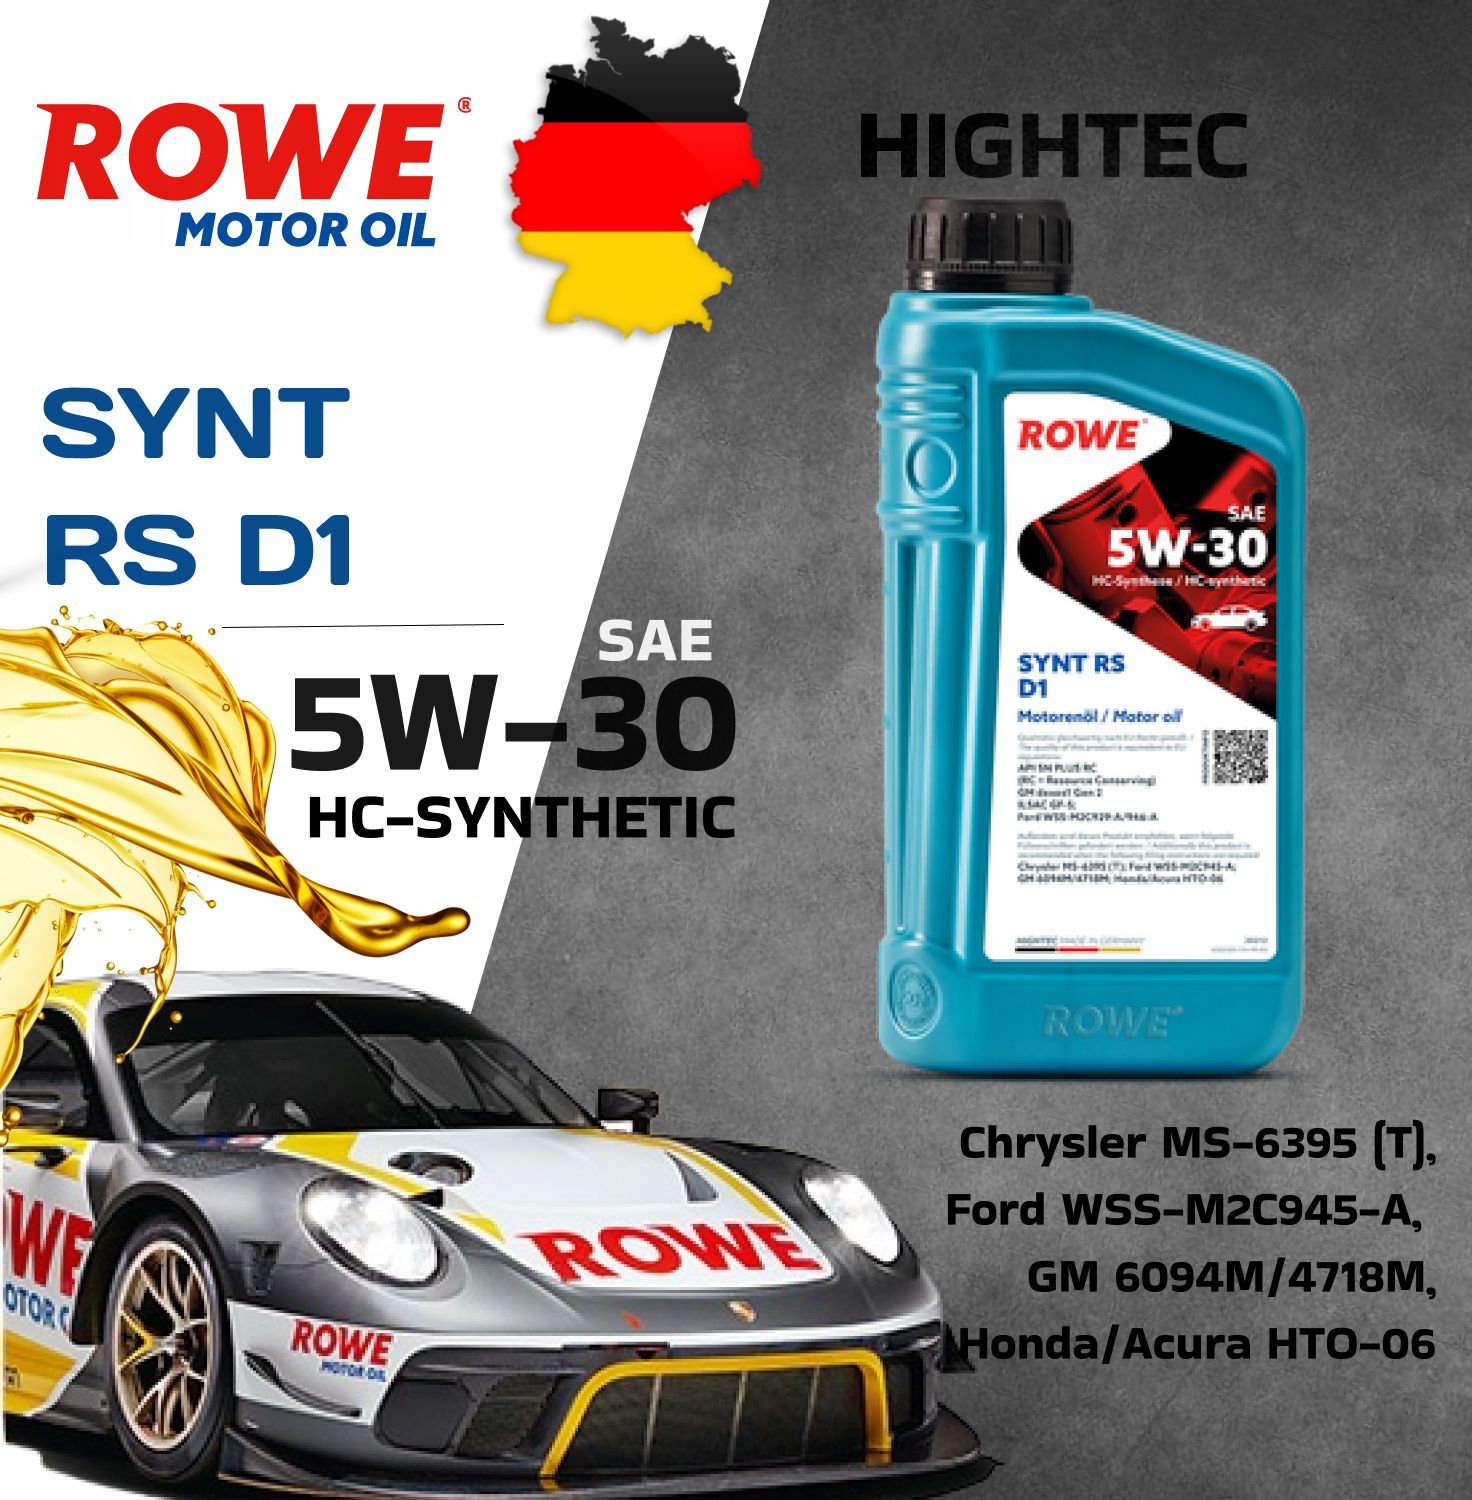 Hightec Synt RS d1 SAE 5w-30. Масло моторное Rowe 5w30 HLS Synt RS d1 4л канистра. Масло моторное Rowe 10w40 HLS Synt RS d1 4л канстра.